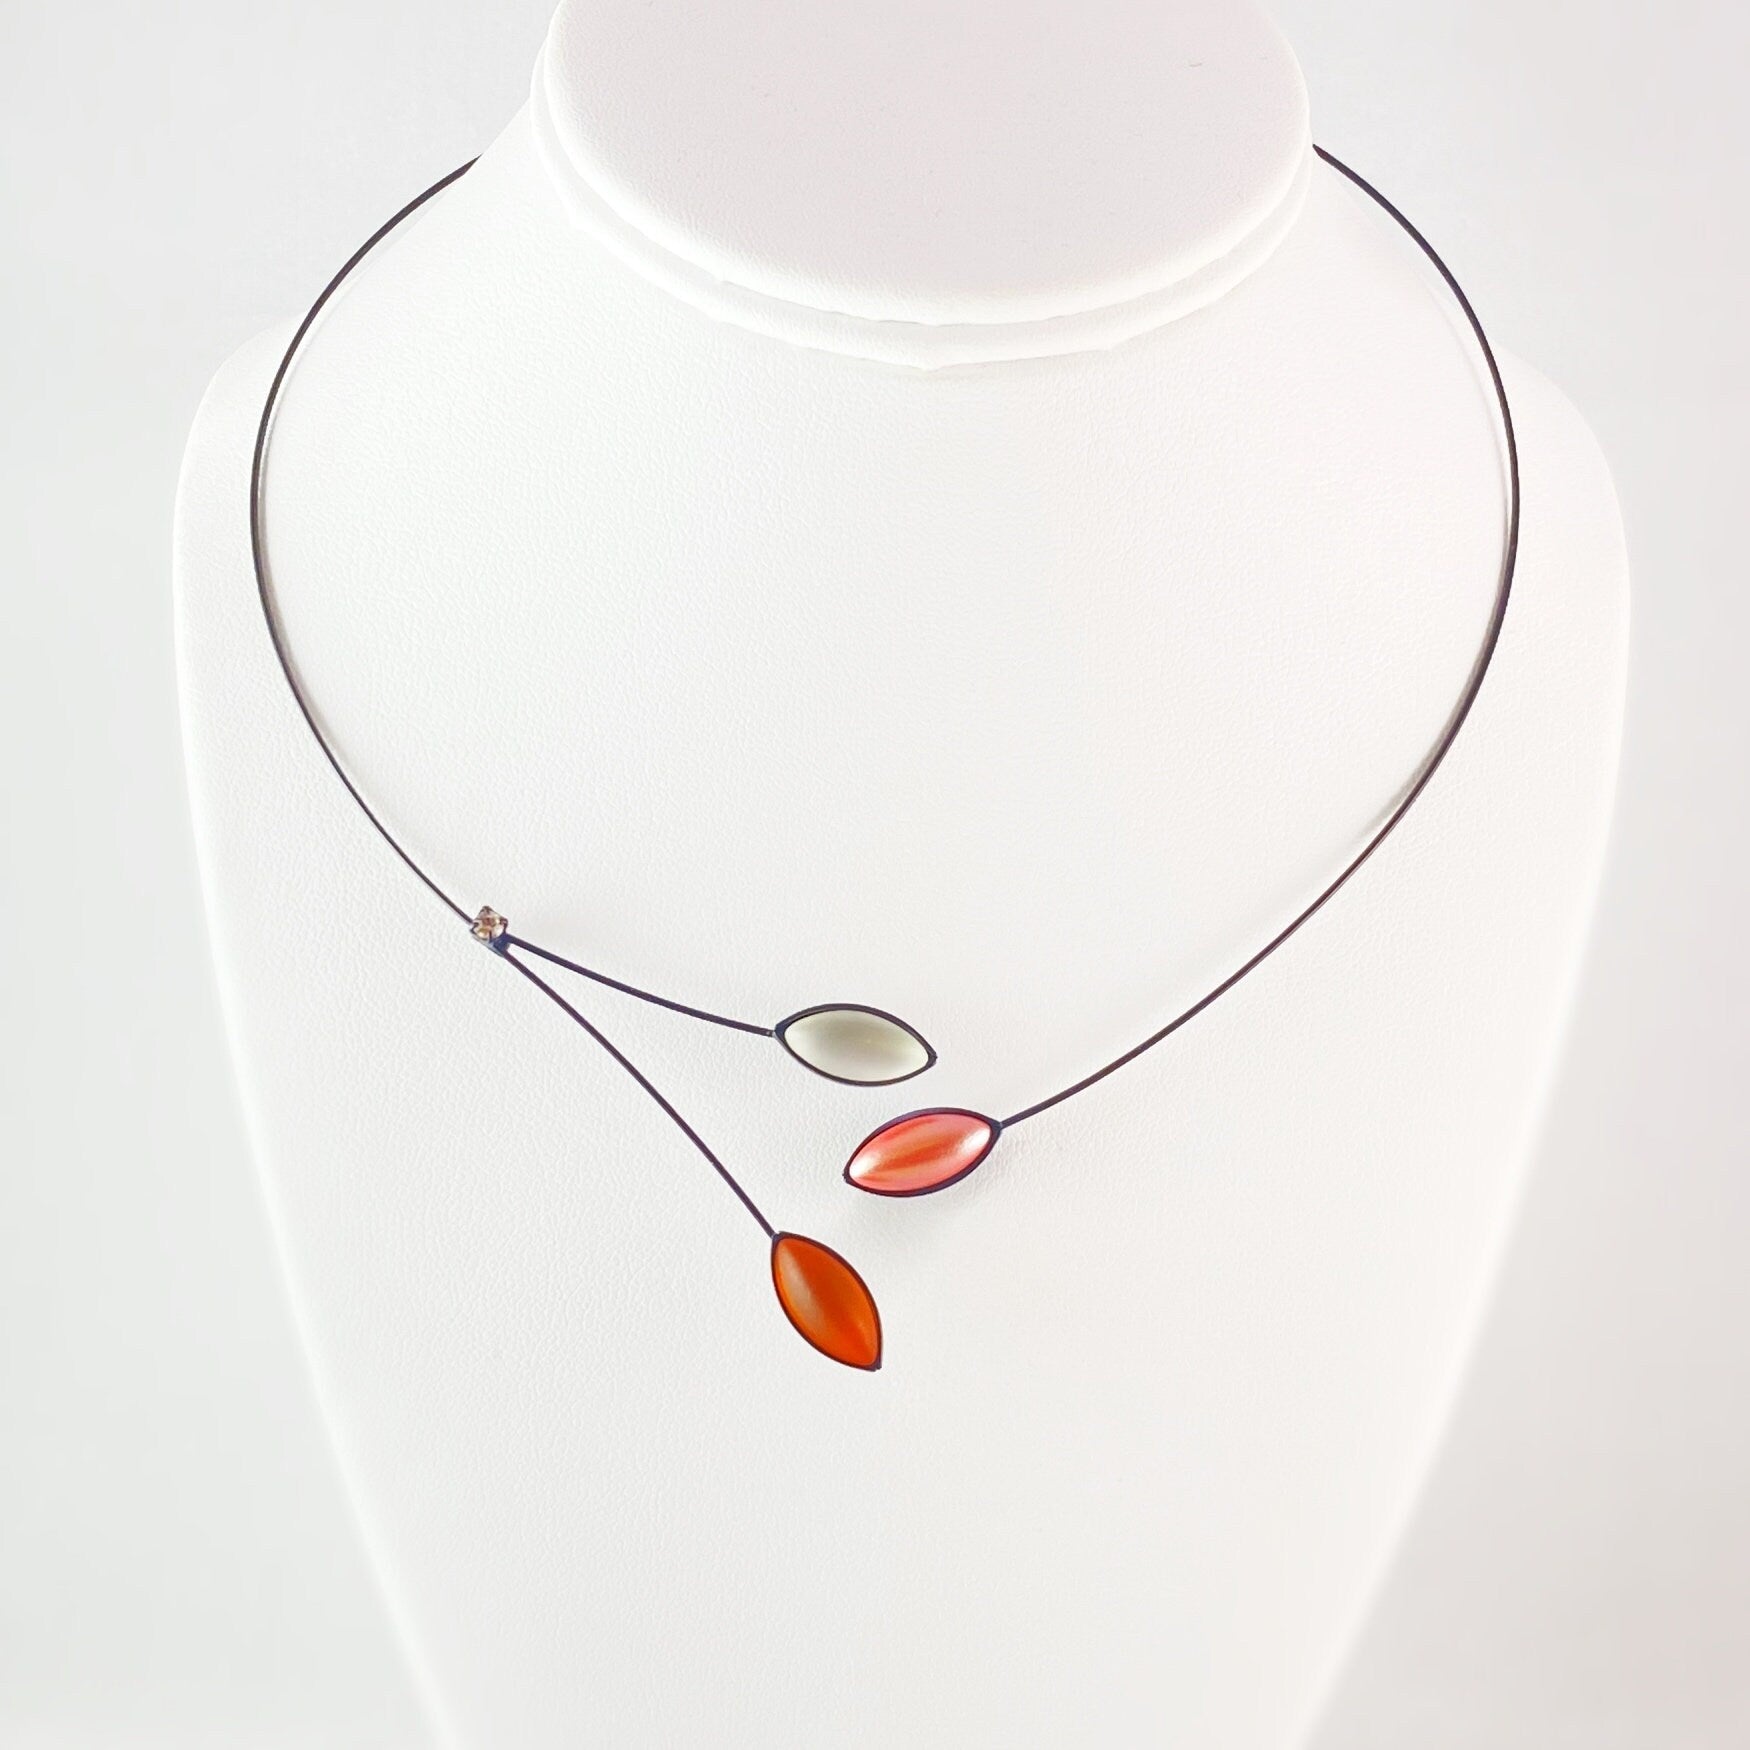 Black Memory Wire Floral Necklace with Handmade Glass Beads, Hypoallergenic, Dk White/Orange Pearl/Orange - Kristina